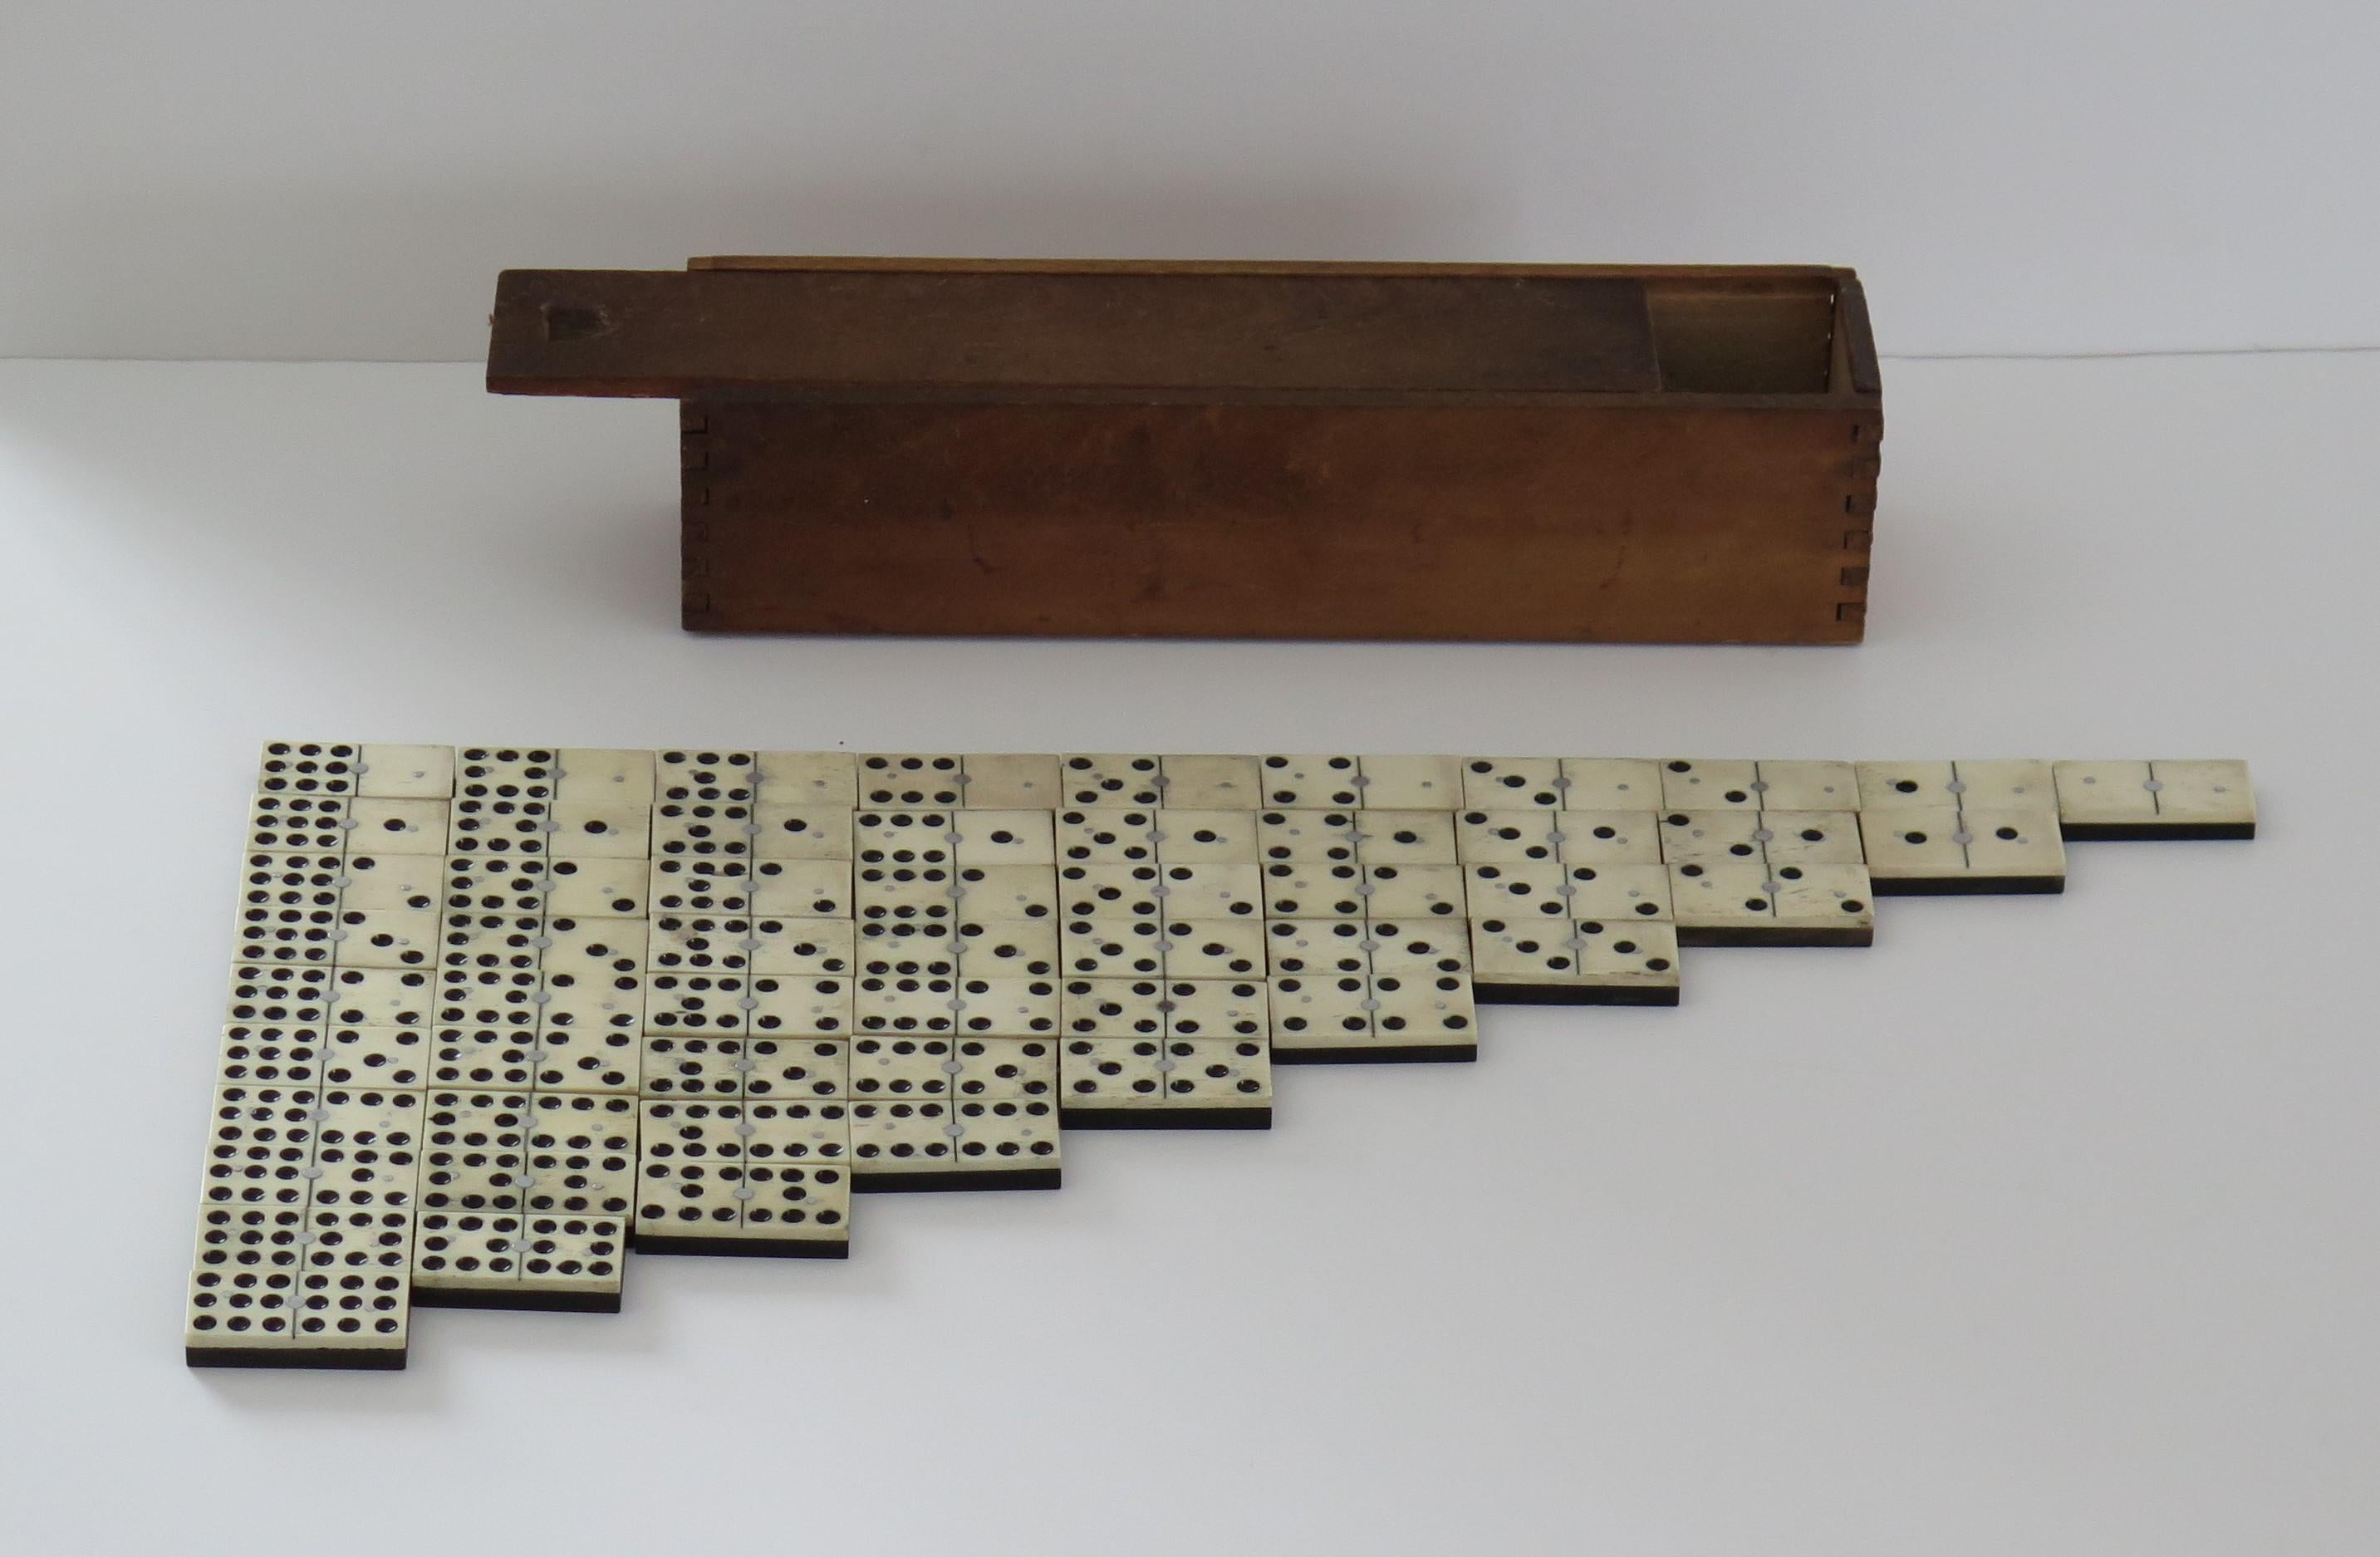 This is a rare and original '9 Spot' Dominoe game of 55 individual dominoes, coming complete with its jointed wooden box or case.

Dominoe sets are normally six-spot sets giving a total of 28 dominoes.
This set is much rarer, having a full nine-spot